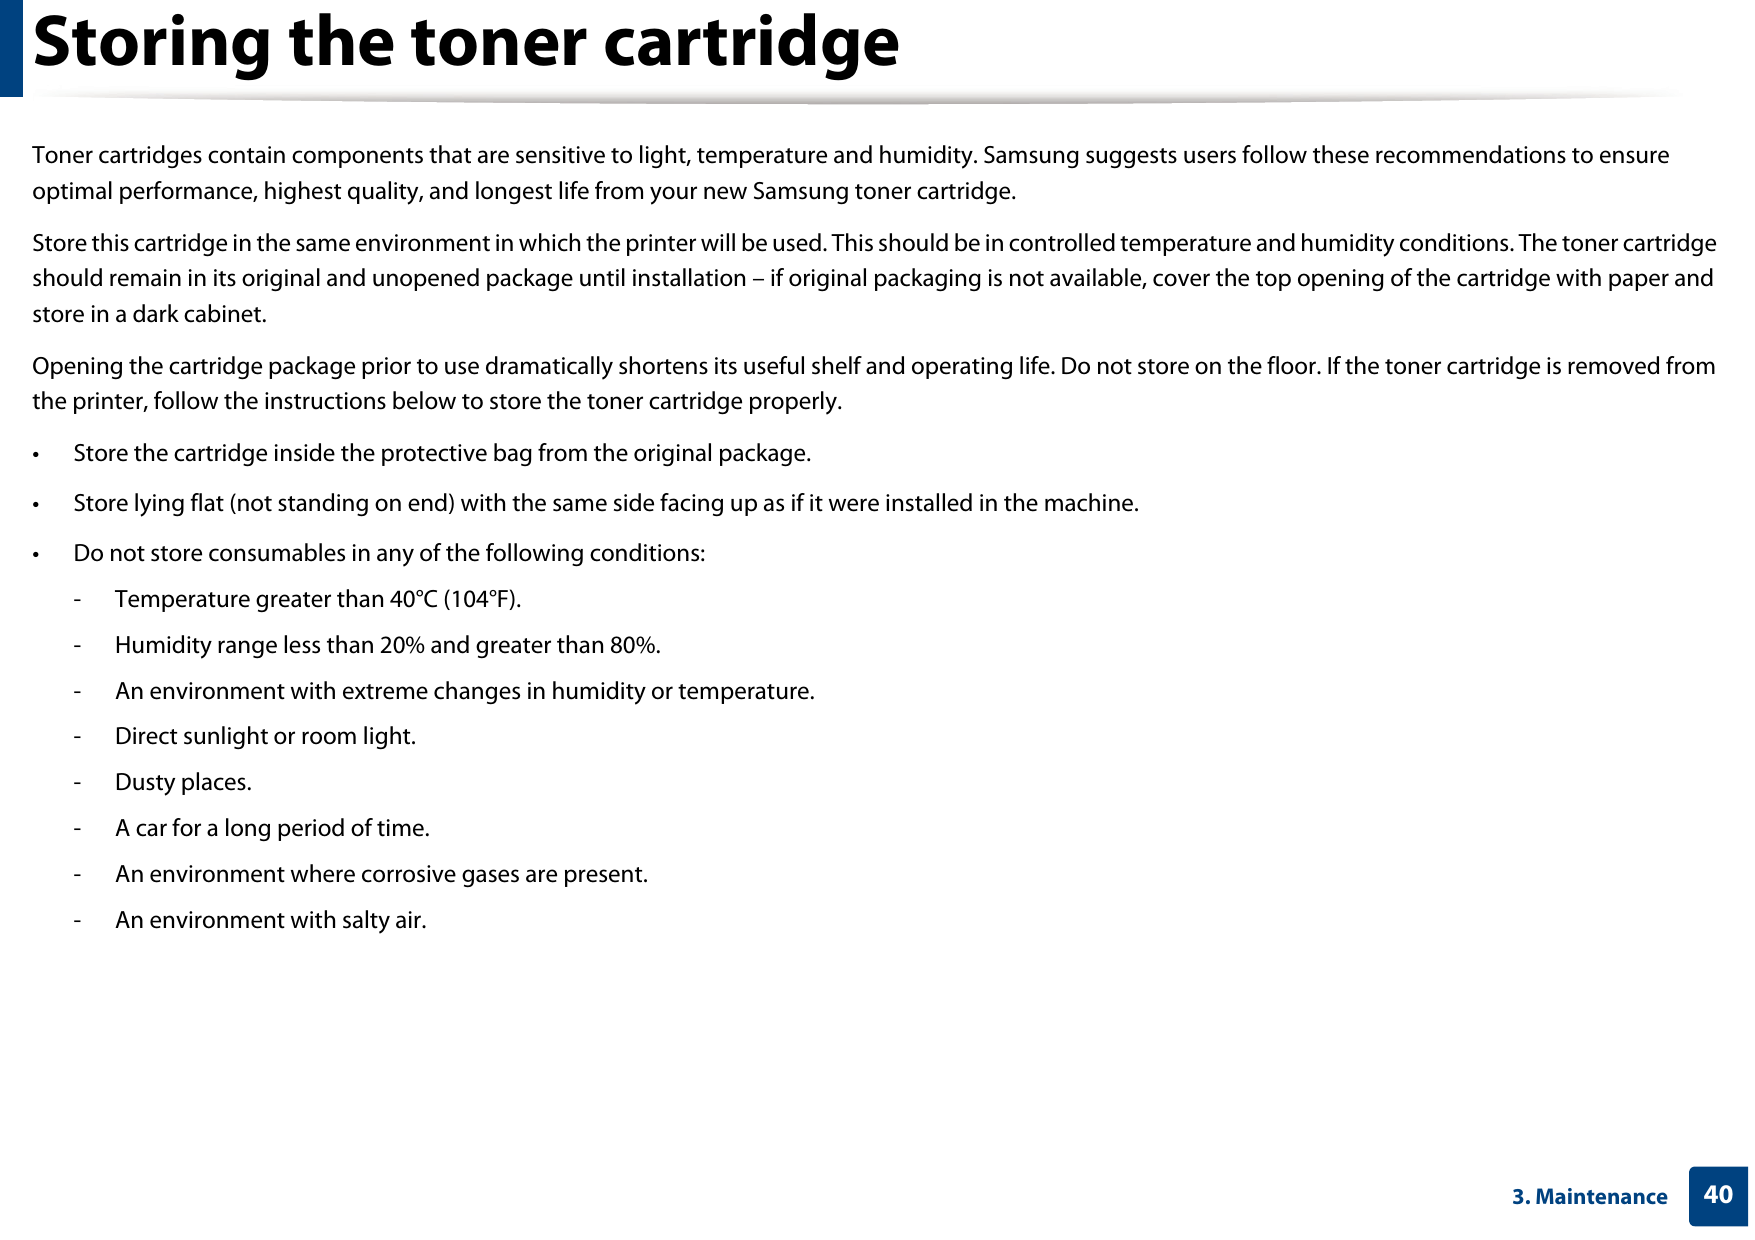 403. MaintenanceStoring the toner cartridgeToner cartridges contain components that are sensitive to light, temperature and humidity. Samsung suggests users follow these recommendations to ensure optimal performance, highest quality, and longest life from your new Samsung toner cartridge.Store this cartridge in the same environment in which the printer will be used. This should be in controlled temperature and humidity conditions. The toner cartridge should remain in its original and unopened package until installation – if original packaging is not available, cover the top opening of the cartridge with paper and store in a dark cabinet.Opening the cartridge package prior to use dramatically shortens its useful shelf and operating life. Do not store on the floor. If the toner cartridge is removed from the printer, follow the instructions below to store the toner cartridge properly.• Store the cartridge inside the protective bag from the original package. • Store lying flat (not standing on end) with the same side facing up as if it were installed in the machine.• Do not store consumables in any of the following conditions:- Temperature greater than 40°C (104°F).- Humidity range less than 20% and greater than 80%.- An environment with extreme changes in humidity or temperature.- Direct sunlight or room light.- Dusty places.- A car for a long period of time.- An environment where corrosive gases are present.- An environment with salty air.